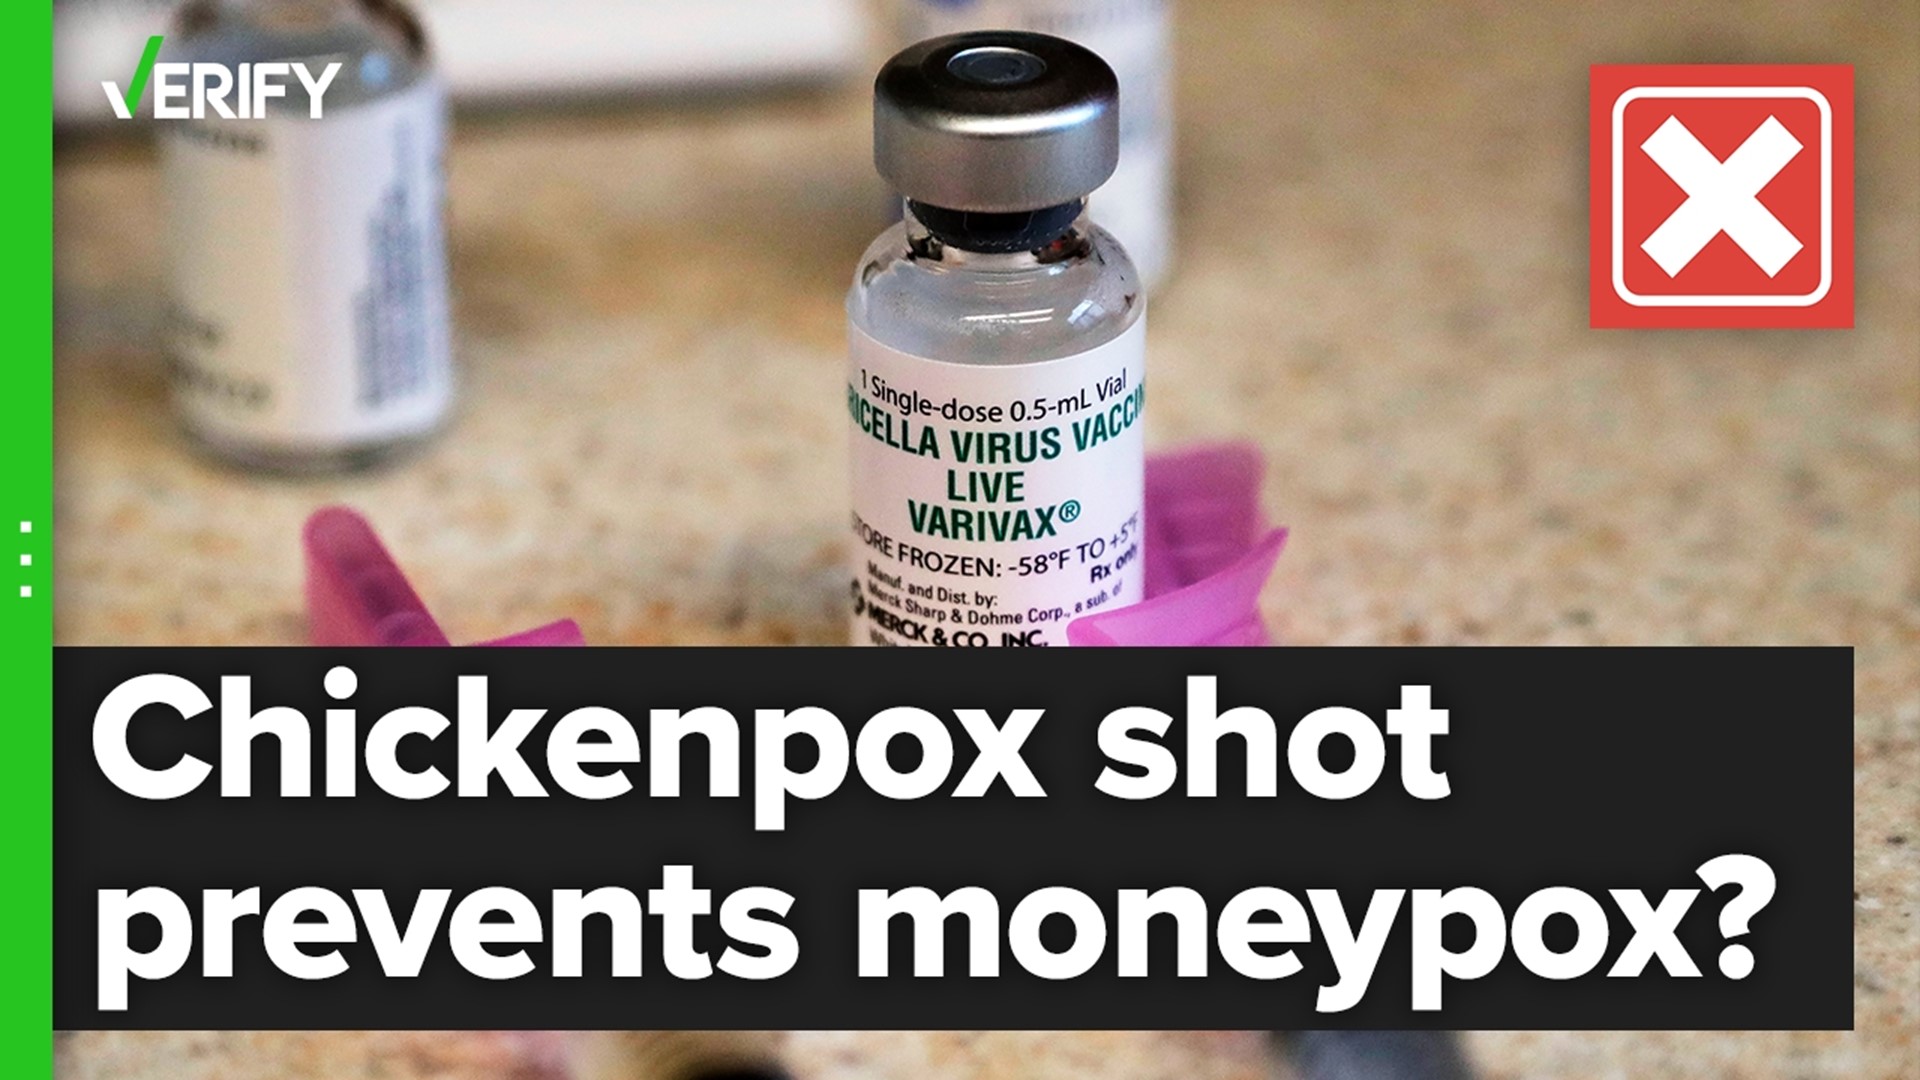 Monkeypox and chickenpox are caused by different viruses. That means that previous chickenpox vaccination or infection does not offer protection against monkeypox.